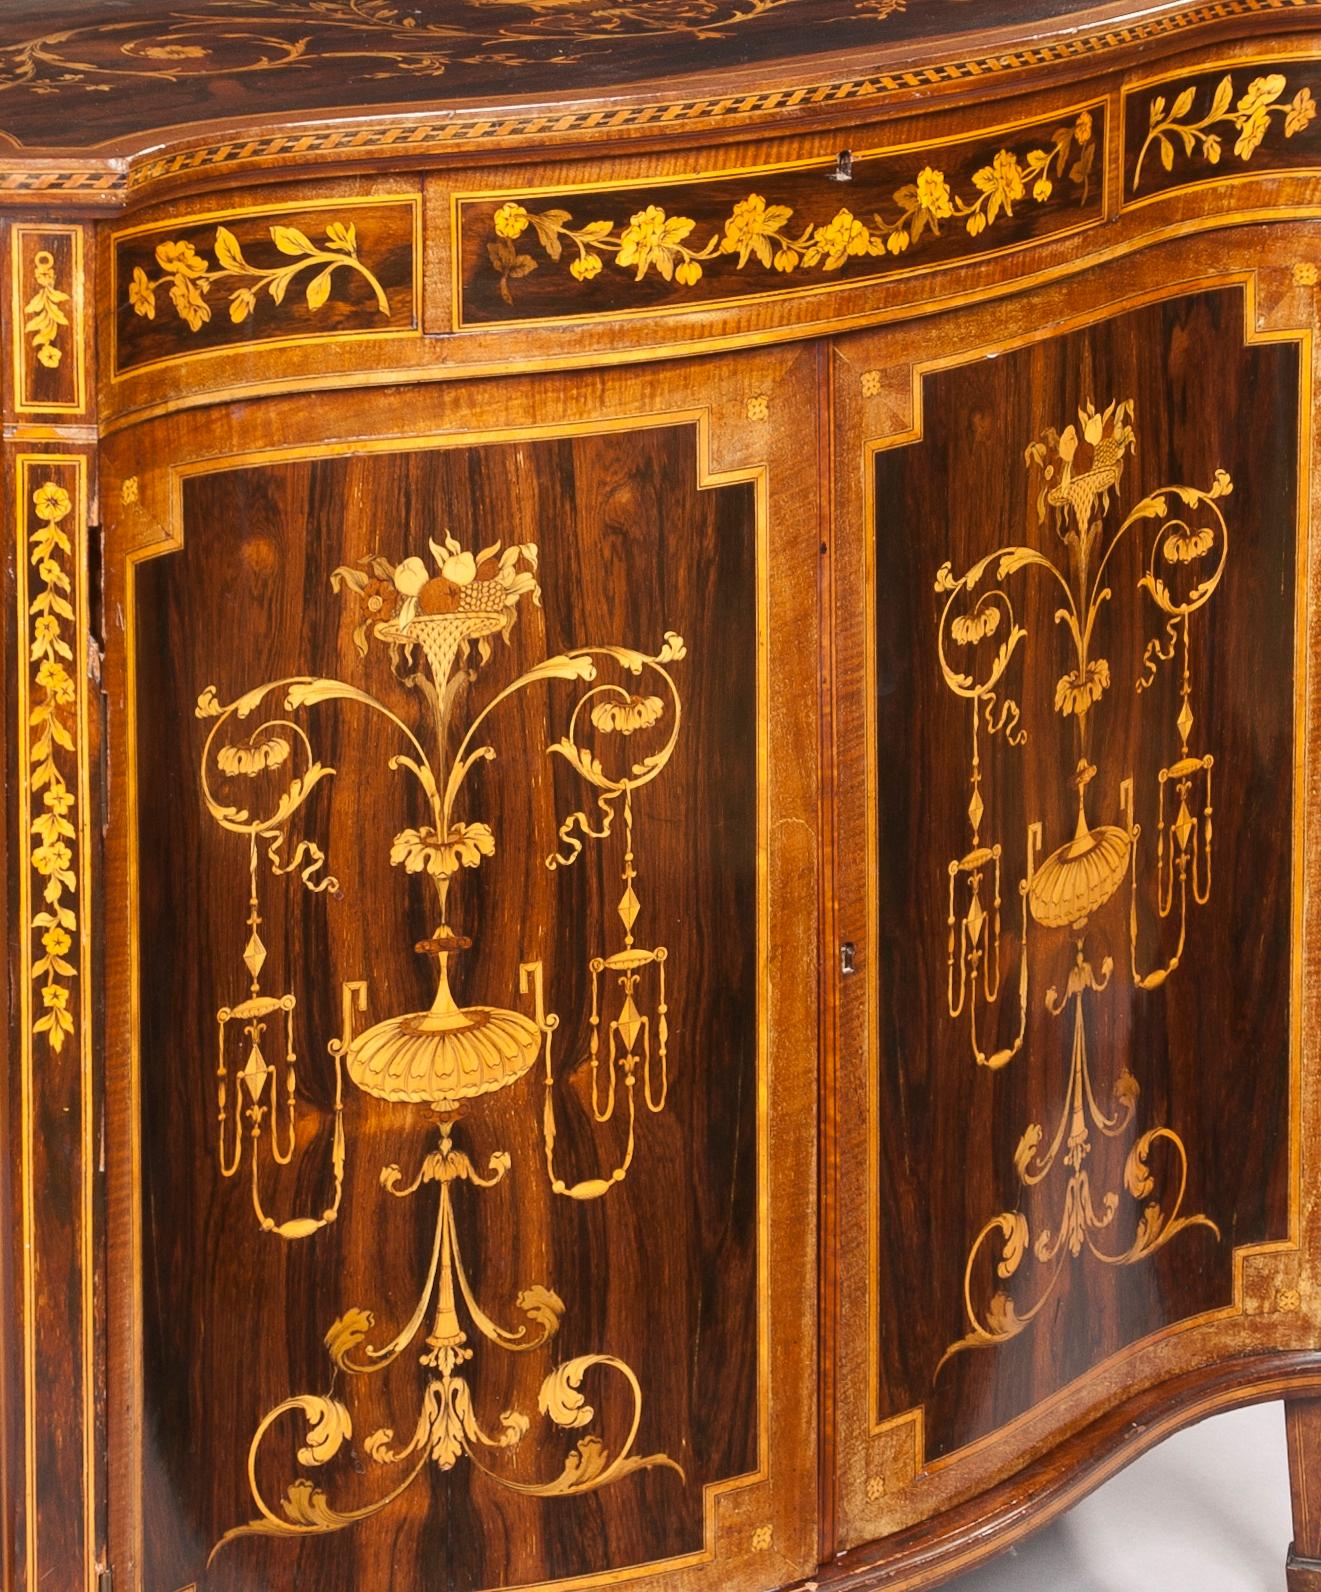 A Fine and Decorative Side Cabinet in the Hepplewhite Manner

Constructed in goncalo alves, with satinwood crossbanding and specimen woods used in the inlays; of serpentine form, rising from spade footed tapered legs, the swept ends framing the two